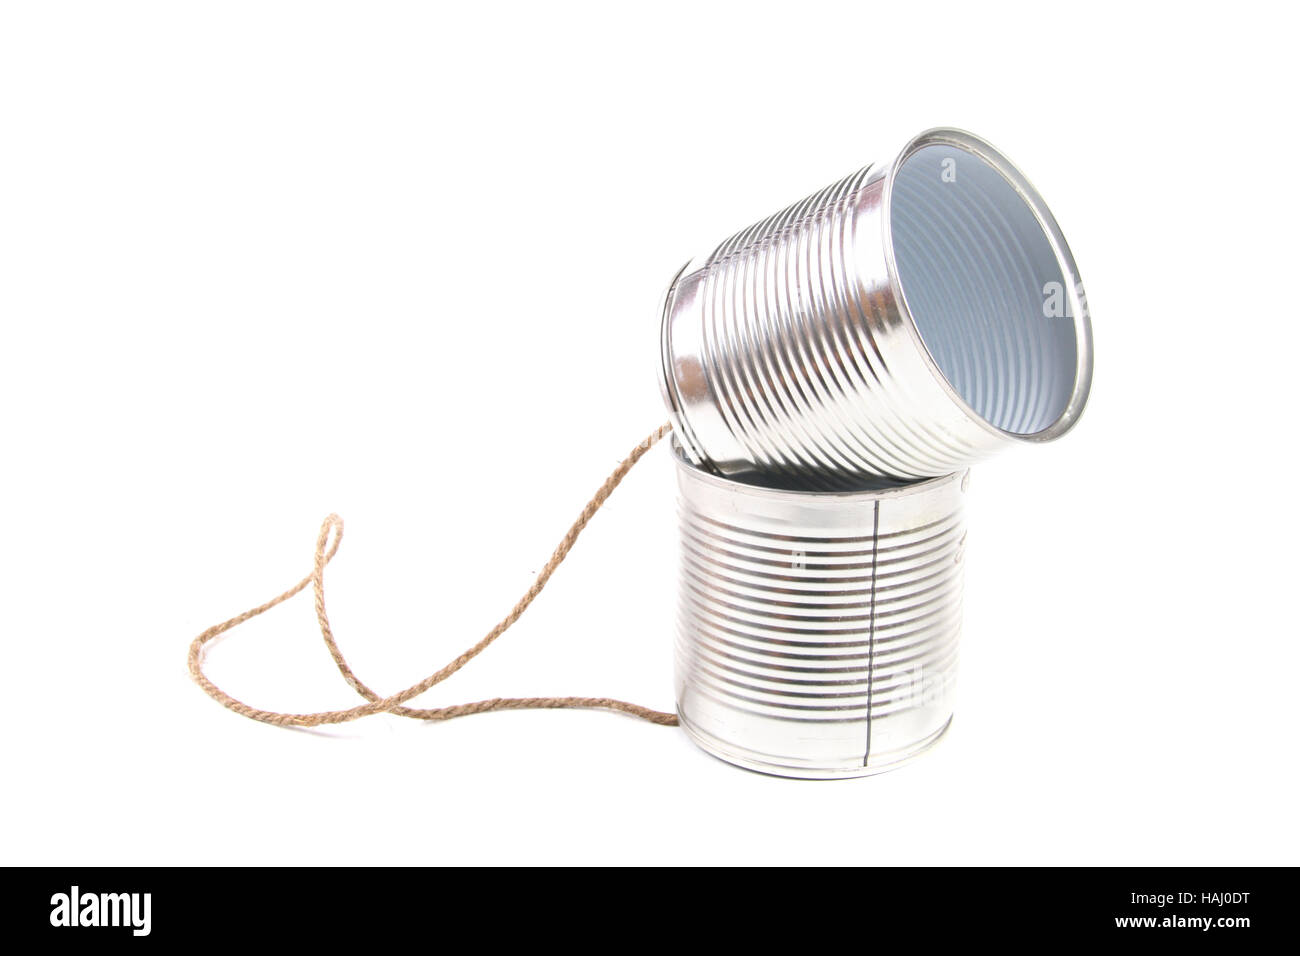 communication concept: tin can phone Stock Photo